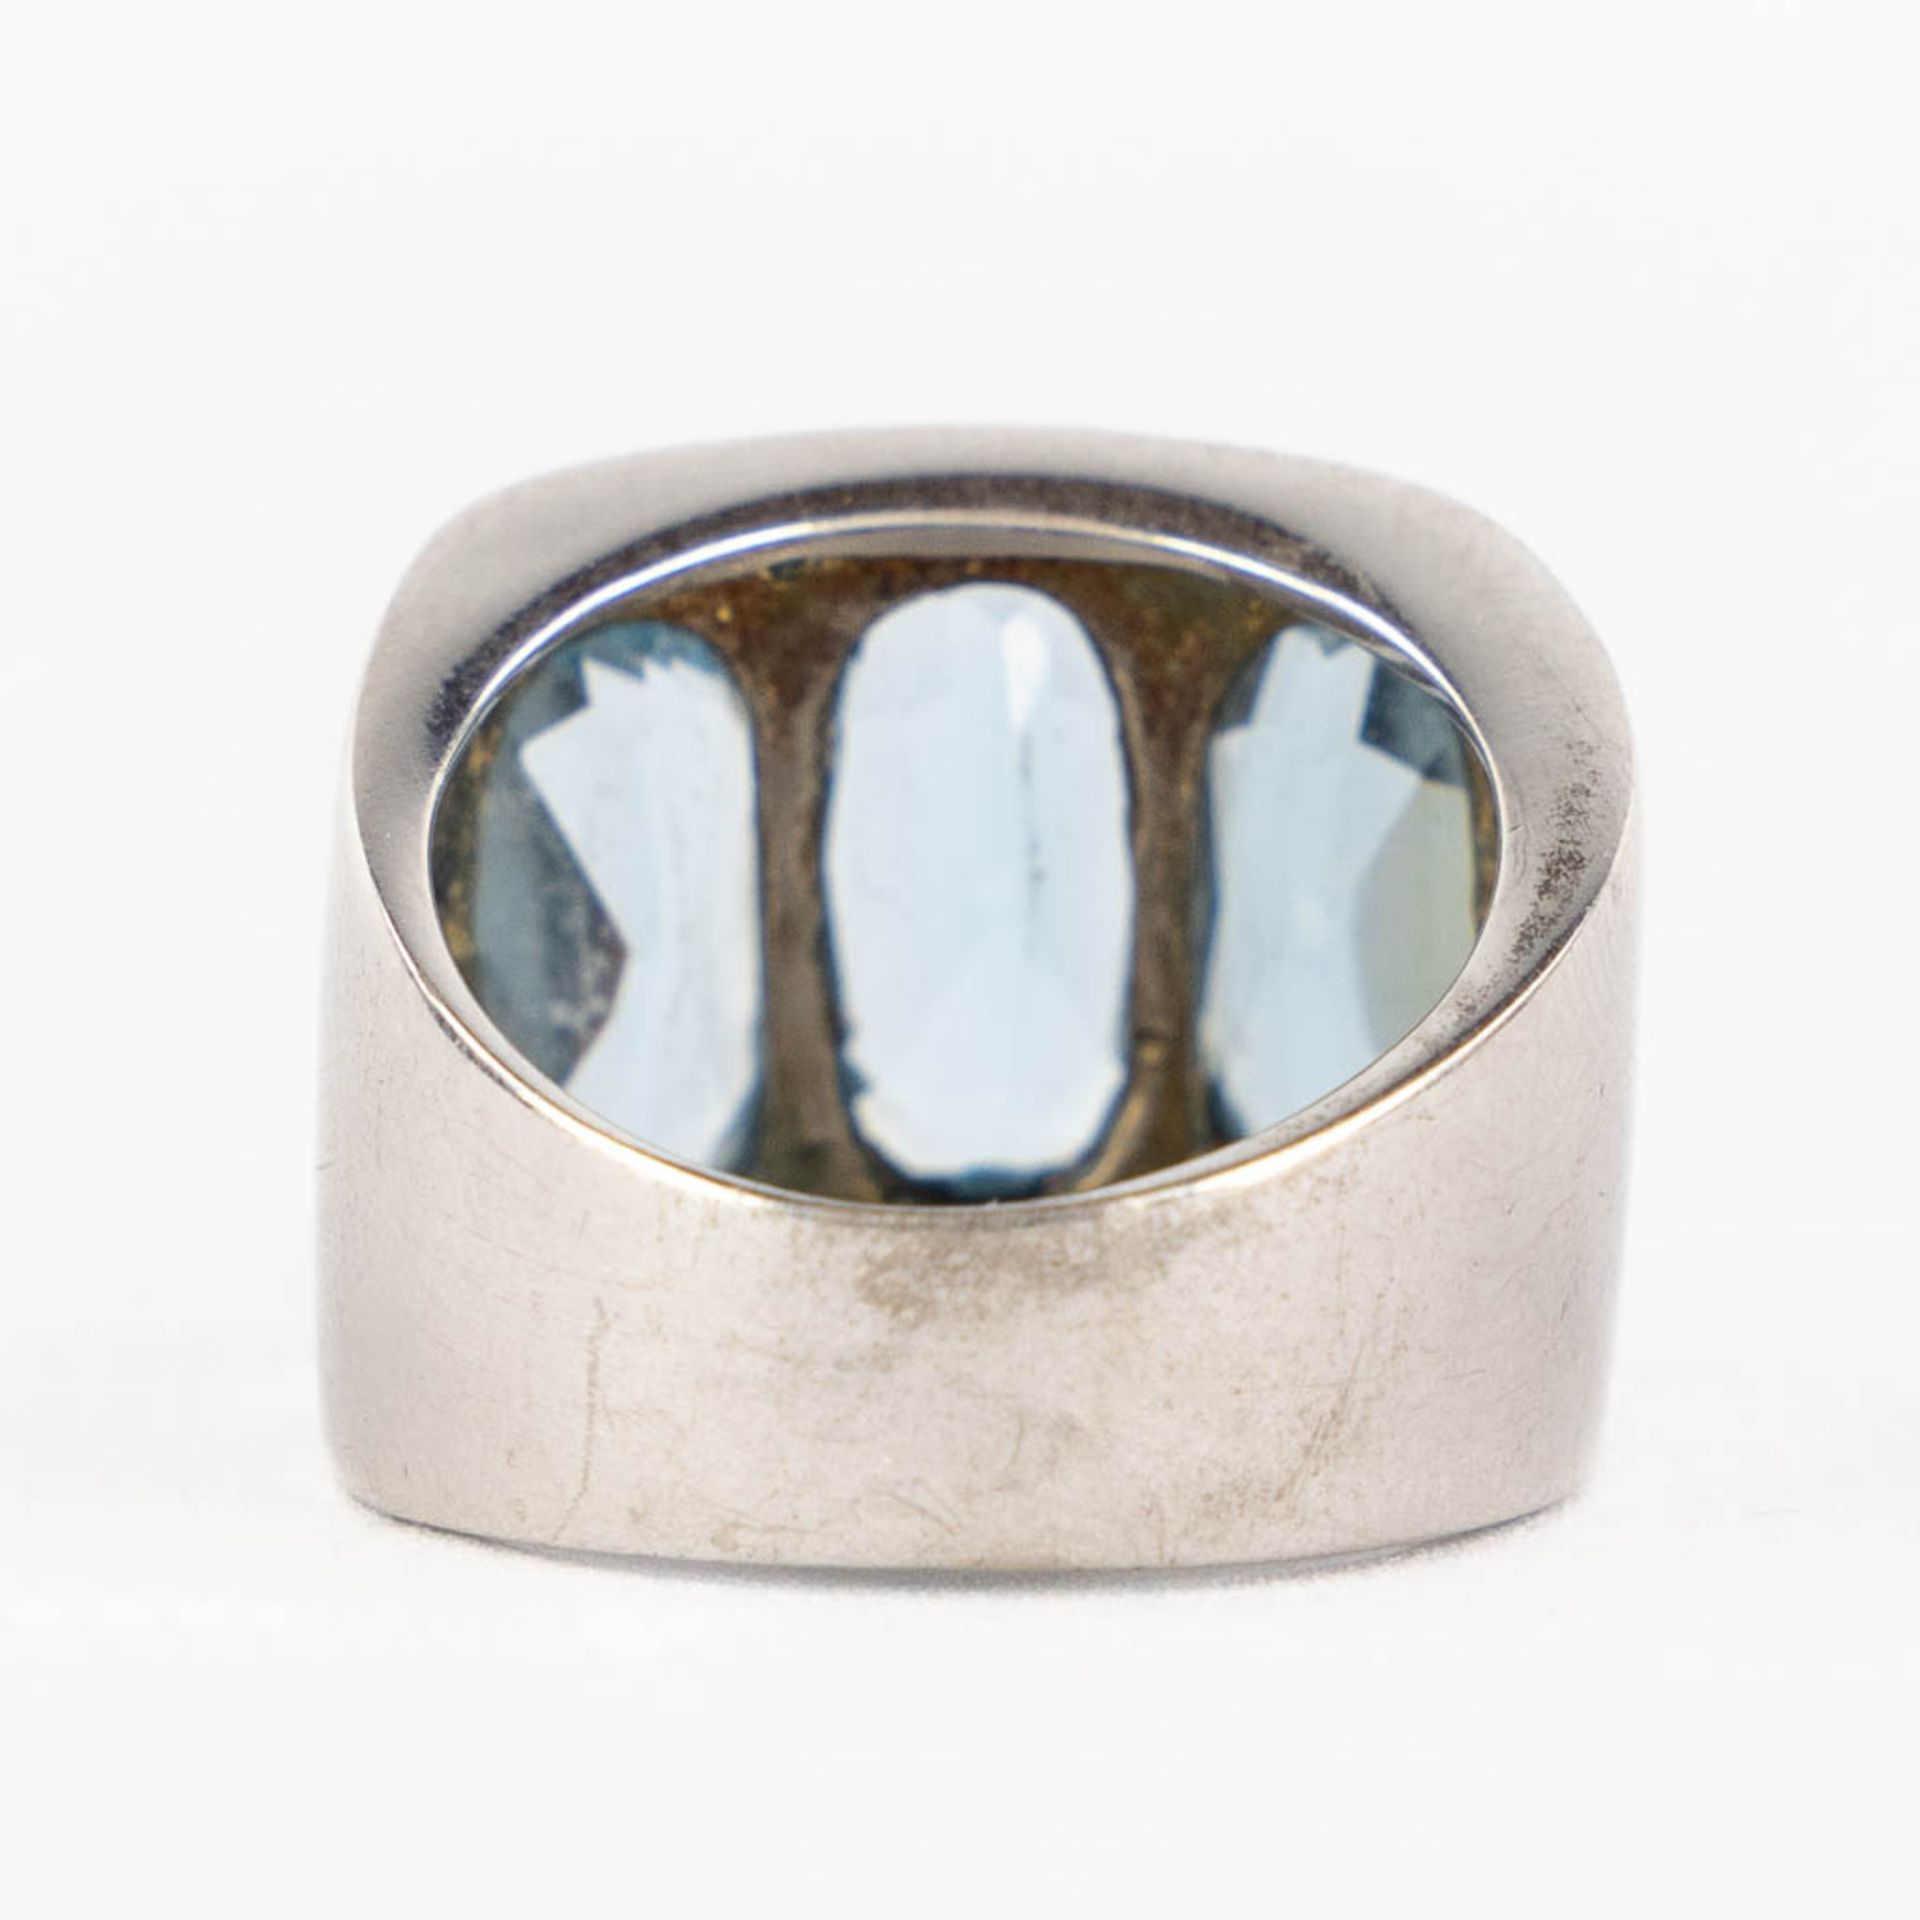 Axel MEES (1966-2012) 'Ring' silver with three facetted natural stones. - Bild 8 aus 11